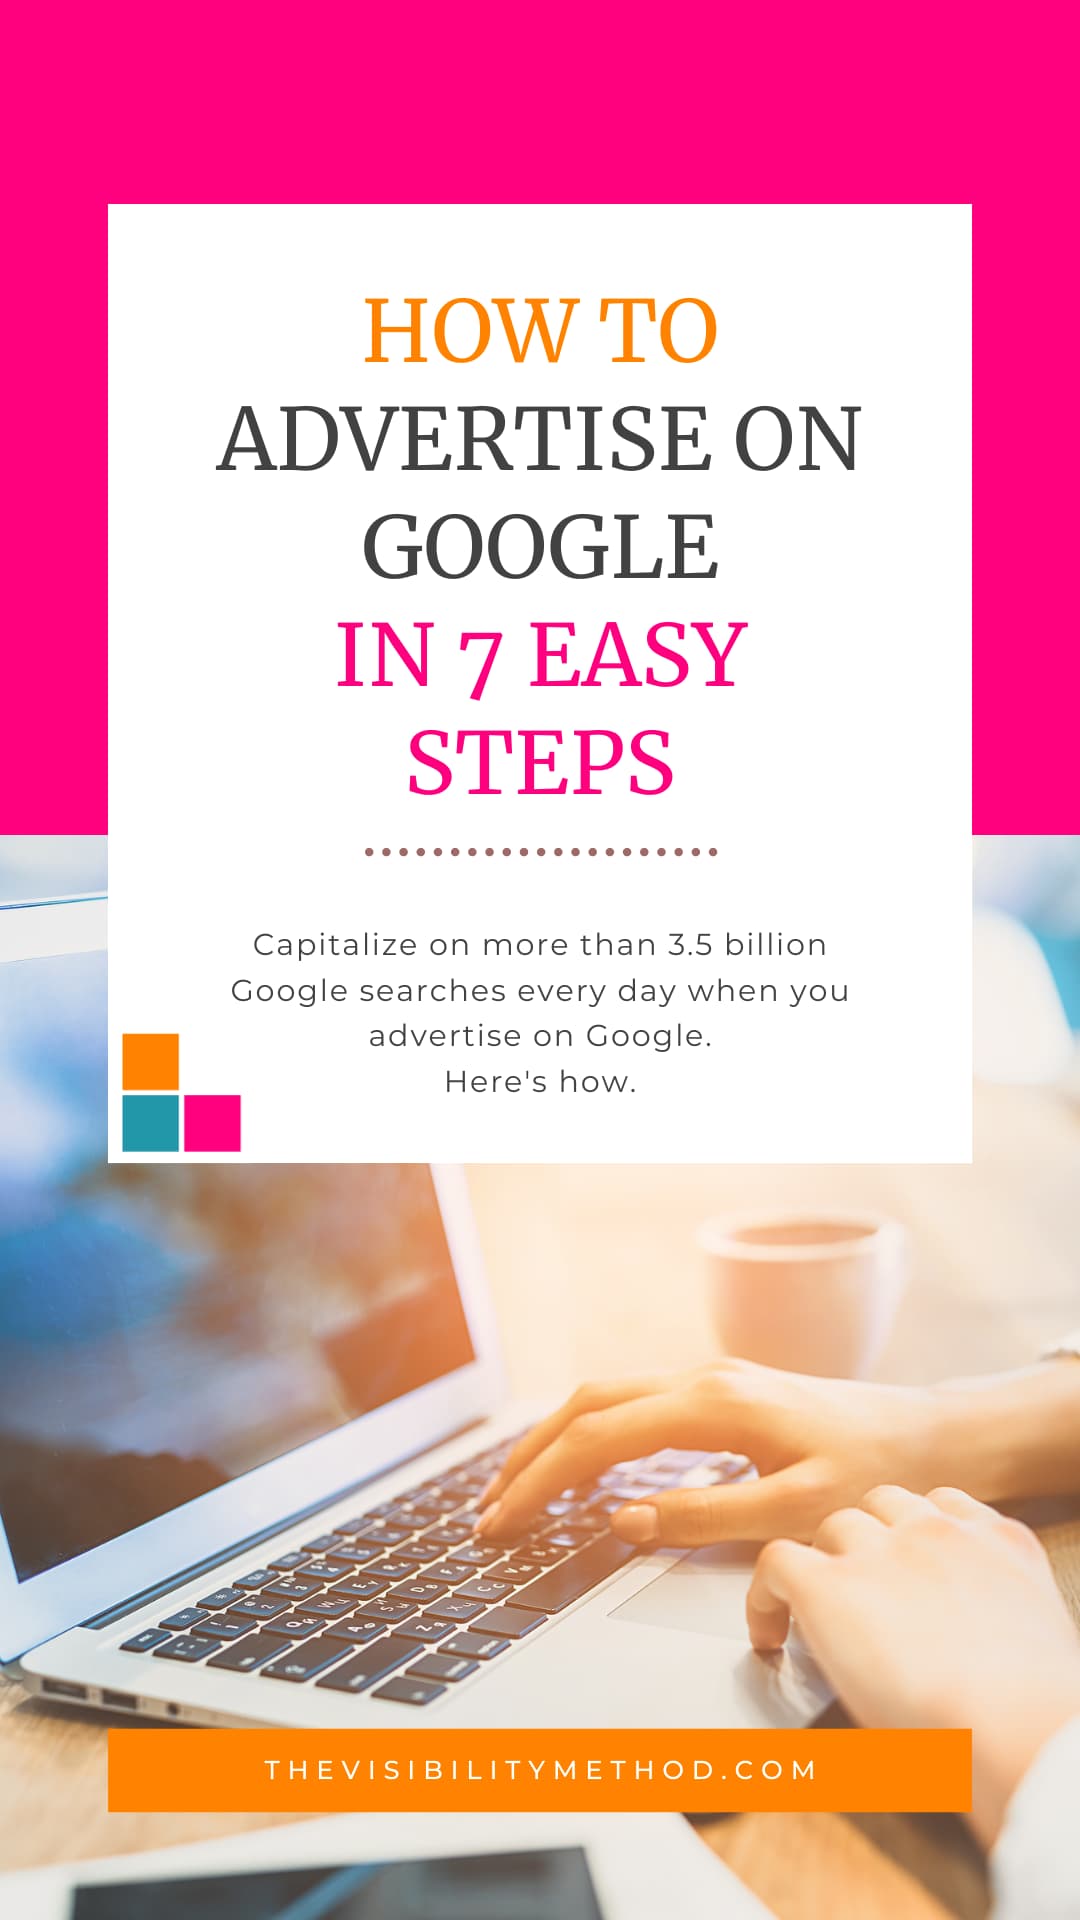 How to Advertise on Google in 7 Easy Steps